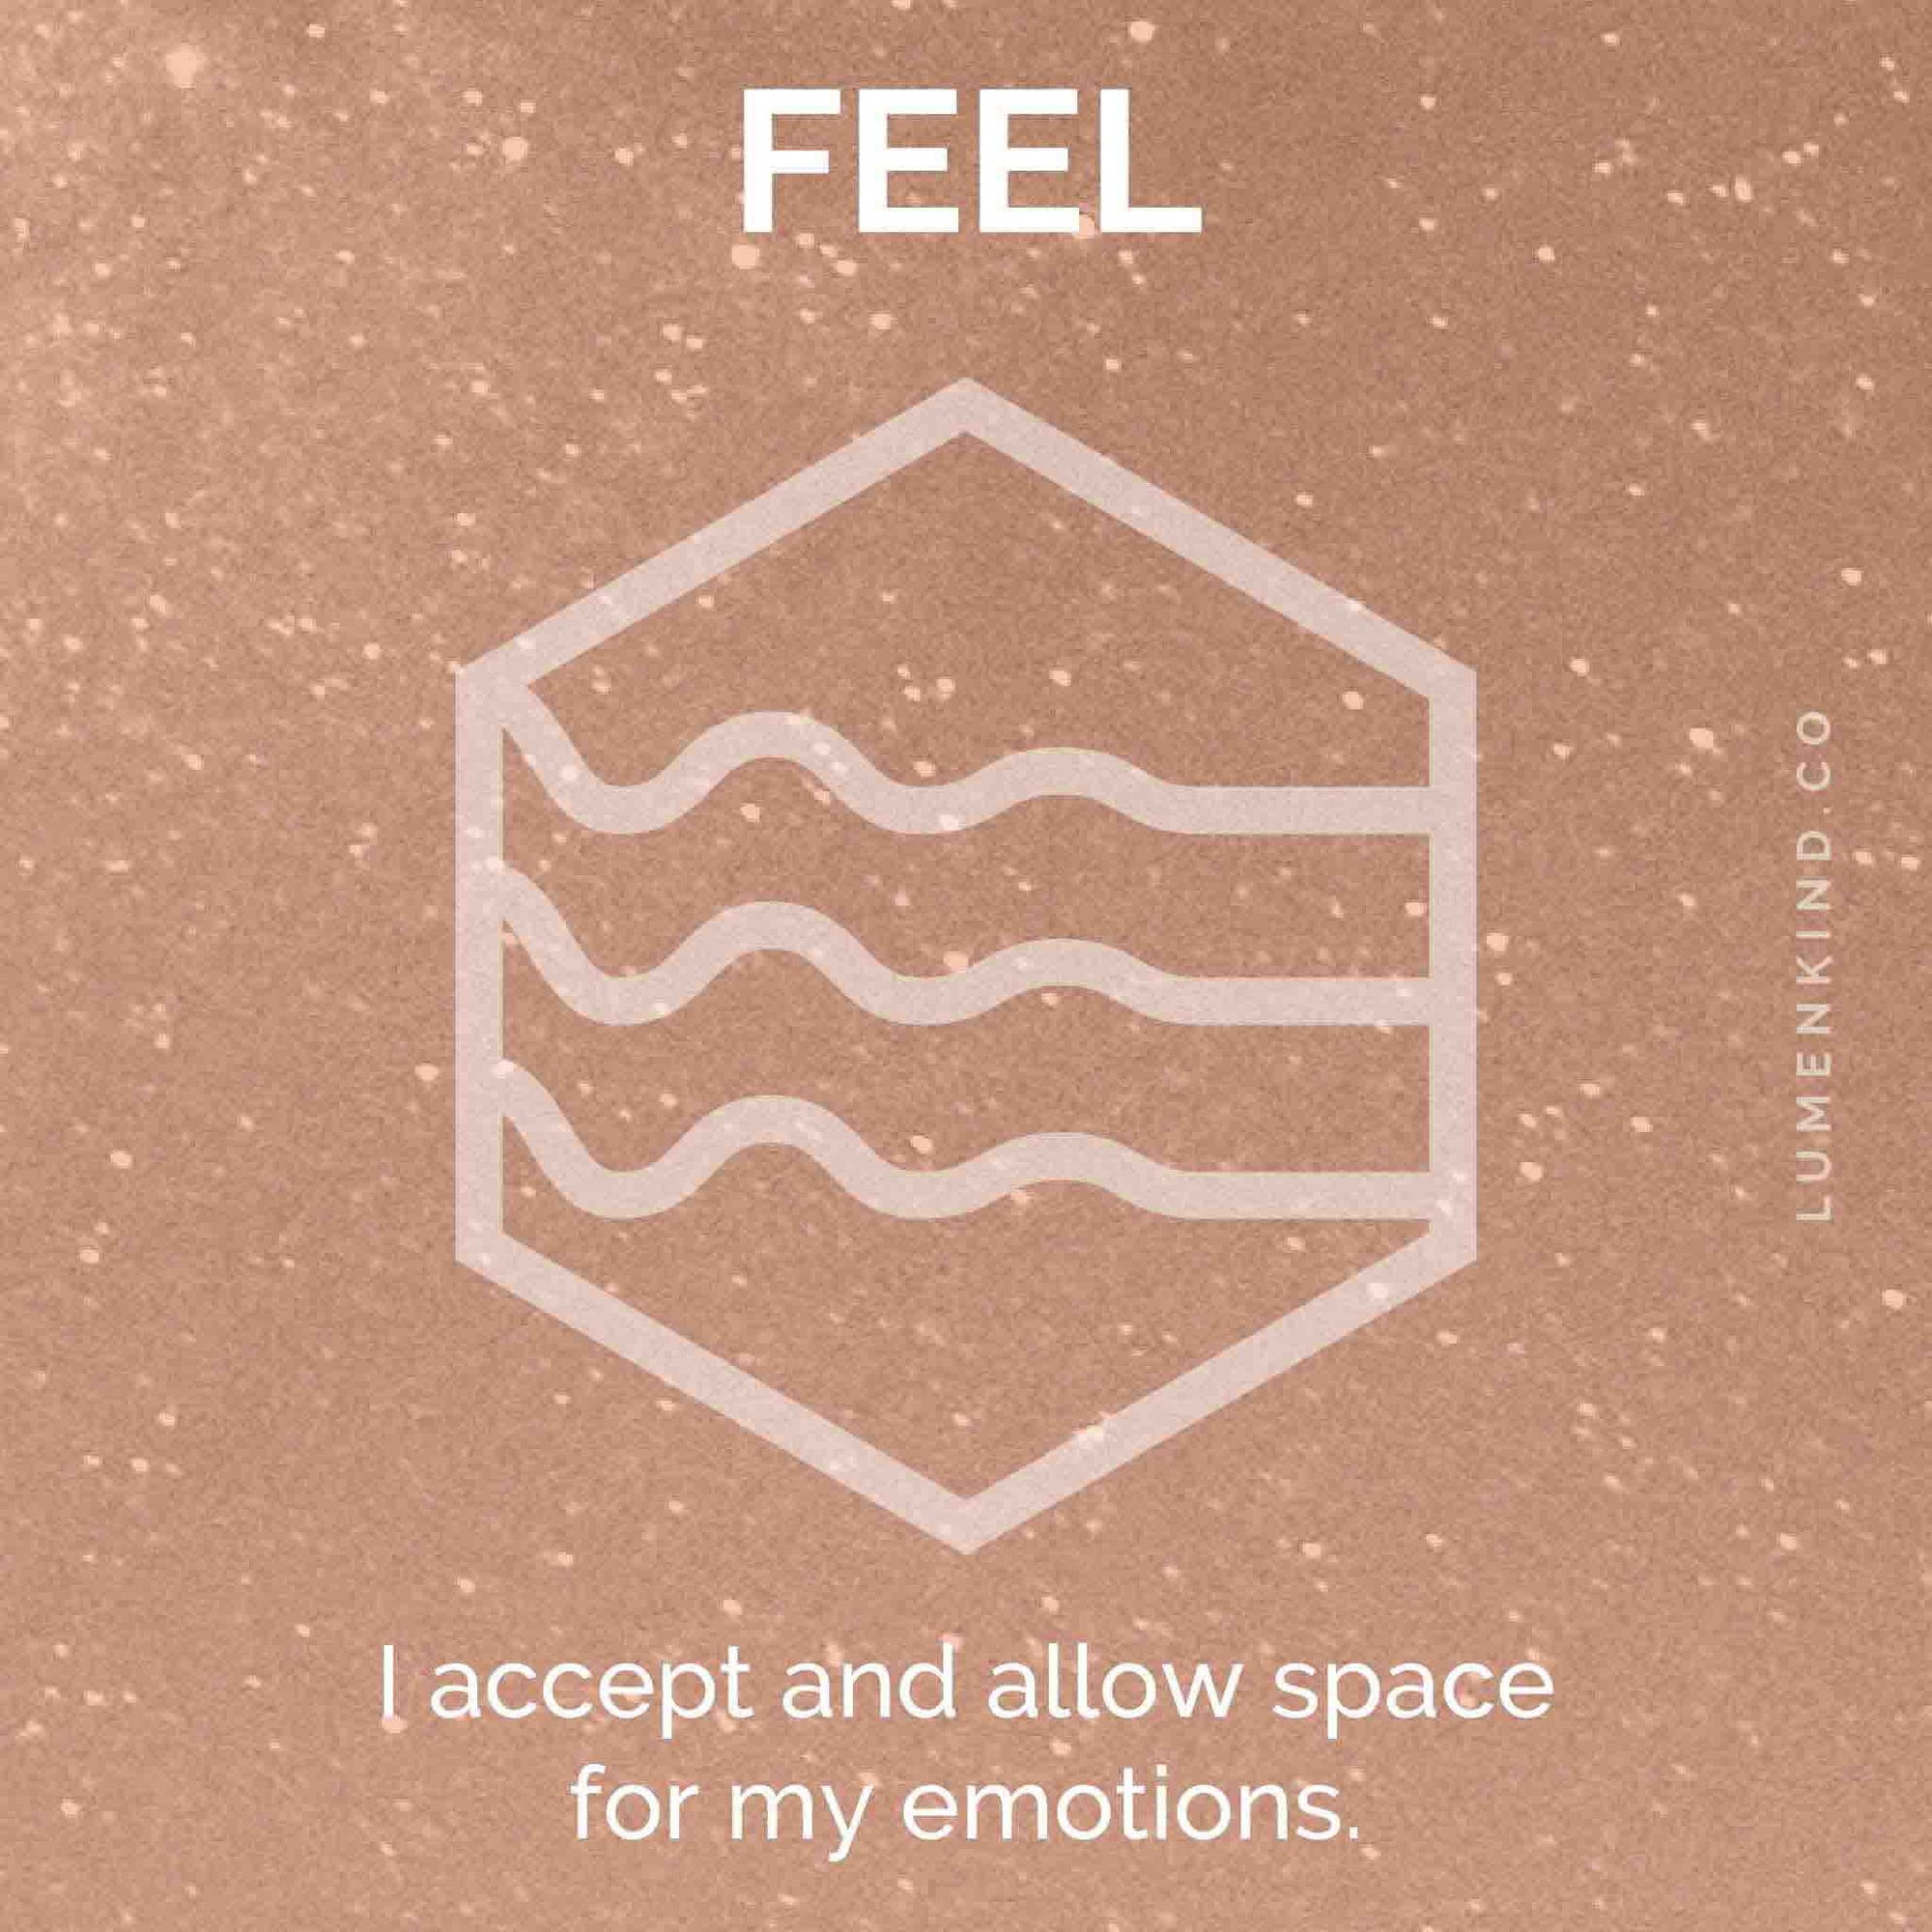 The suggested intention is FEEL. I accept and allow space for my emotions.